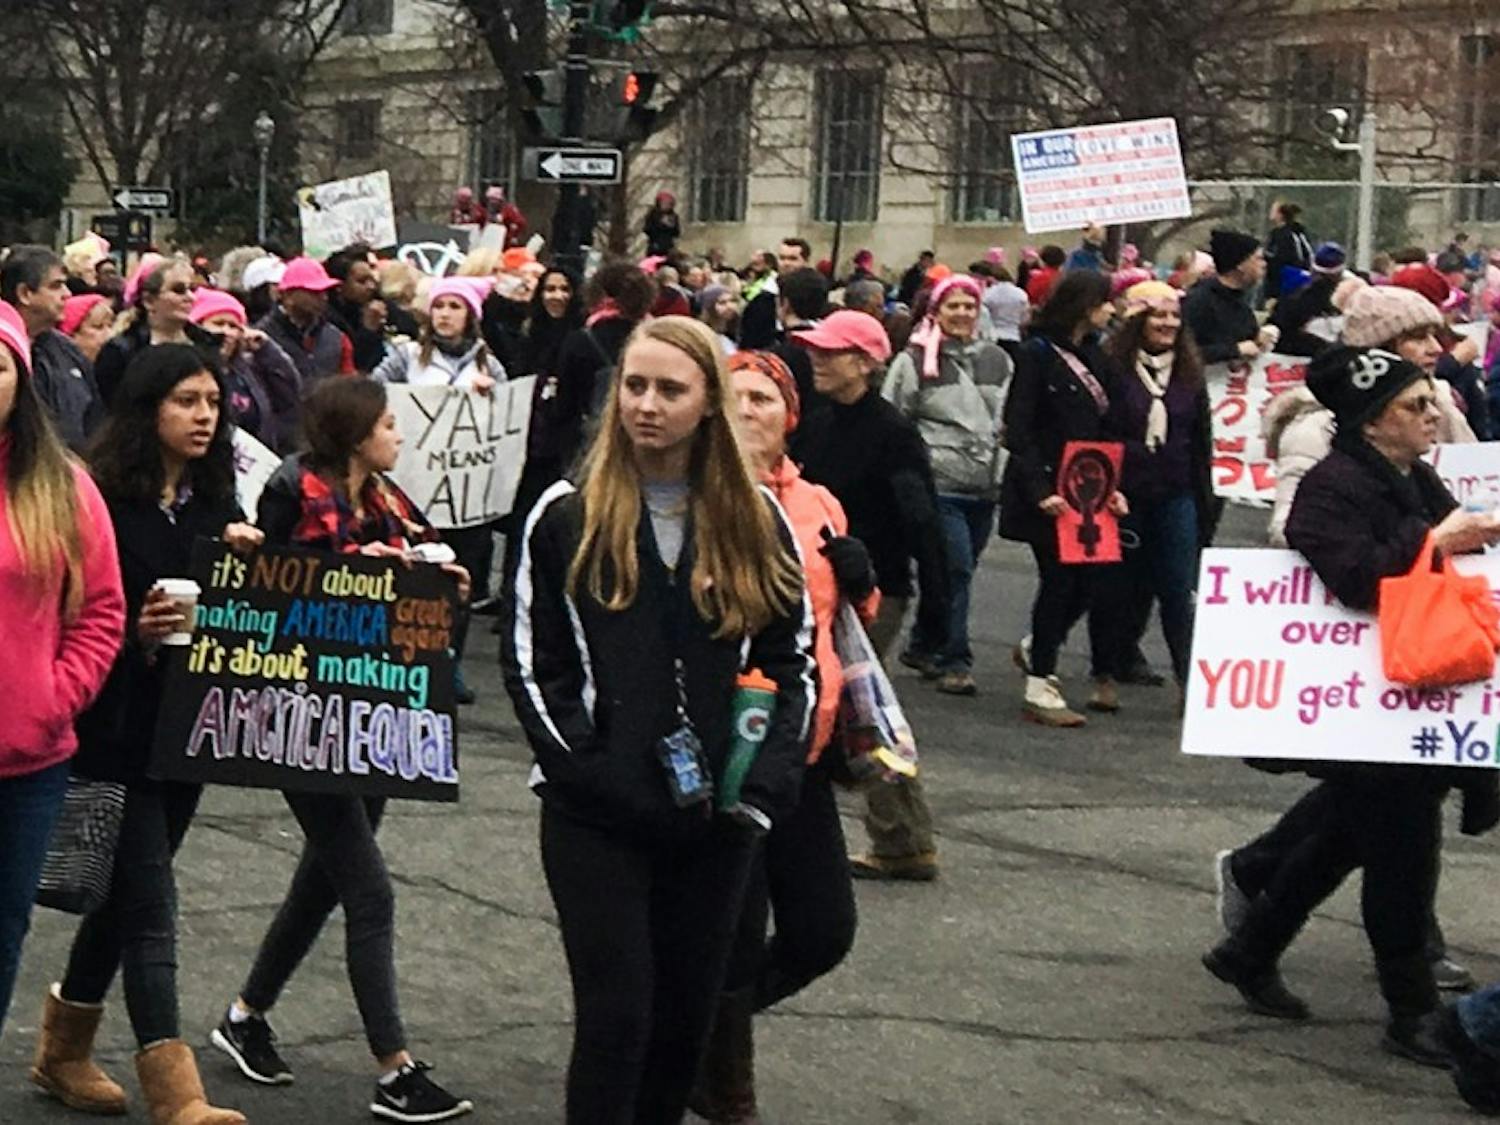 The Women’s March in Washington, D.C. had about three times more people than Trump’s inauguration, according to crowd scientists.